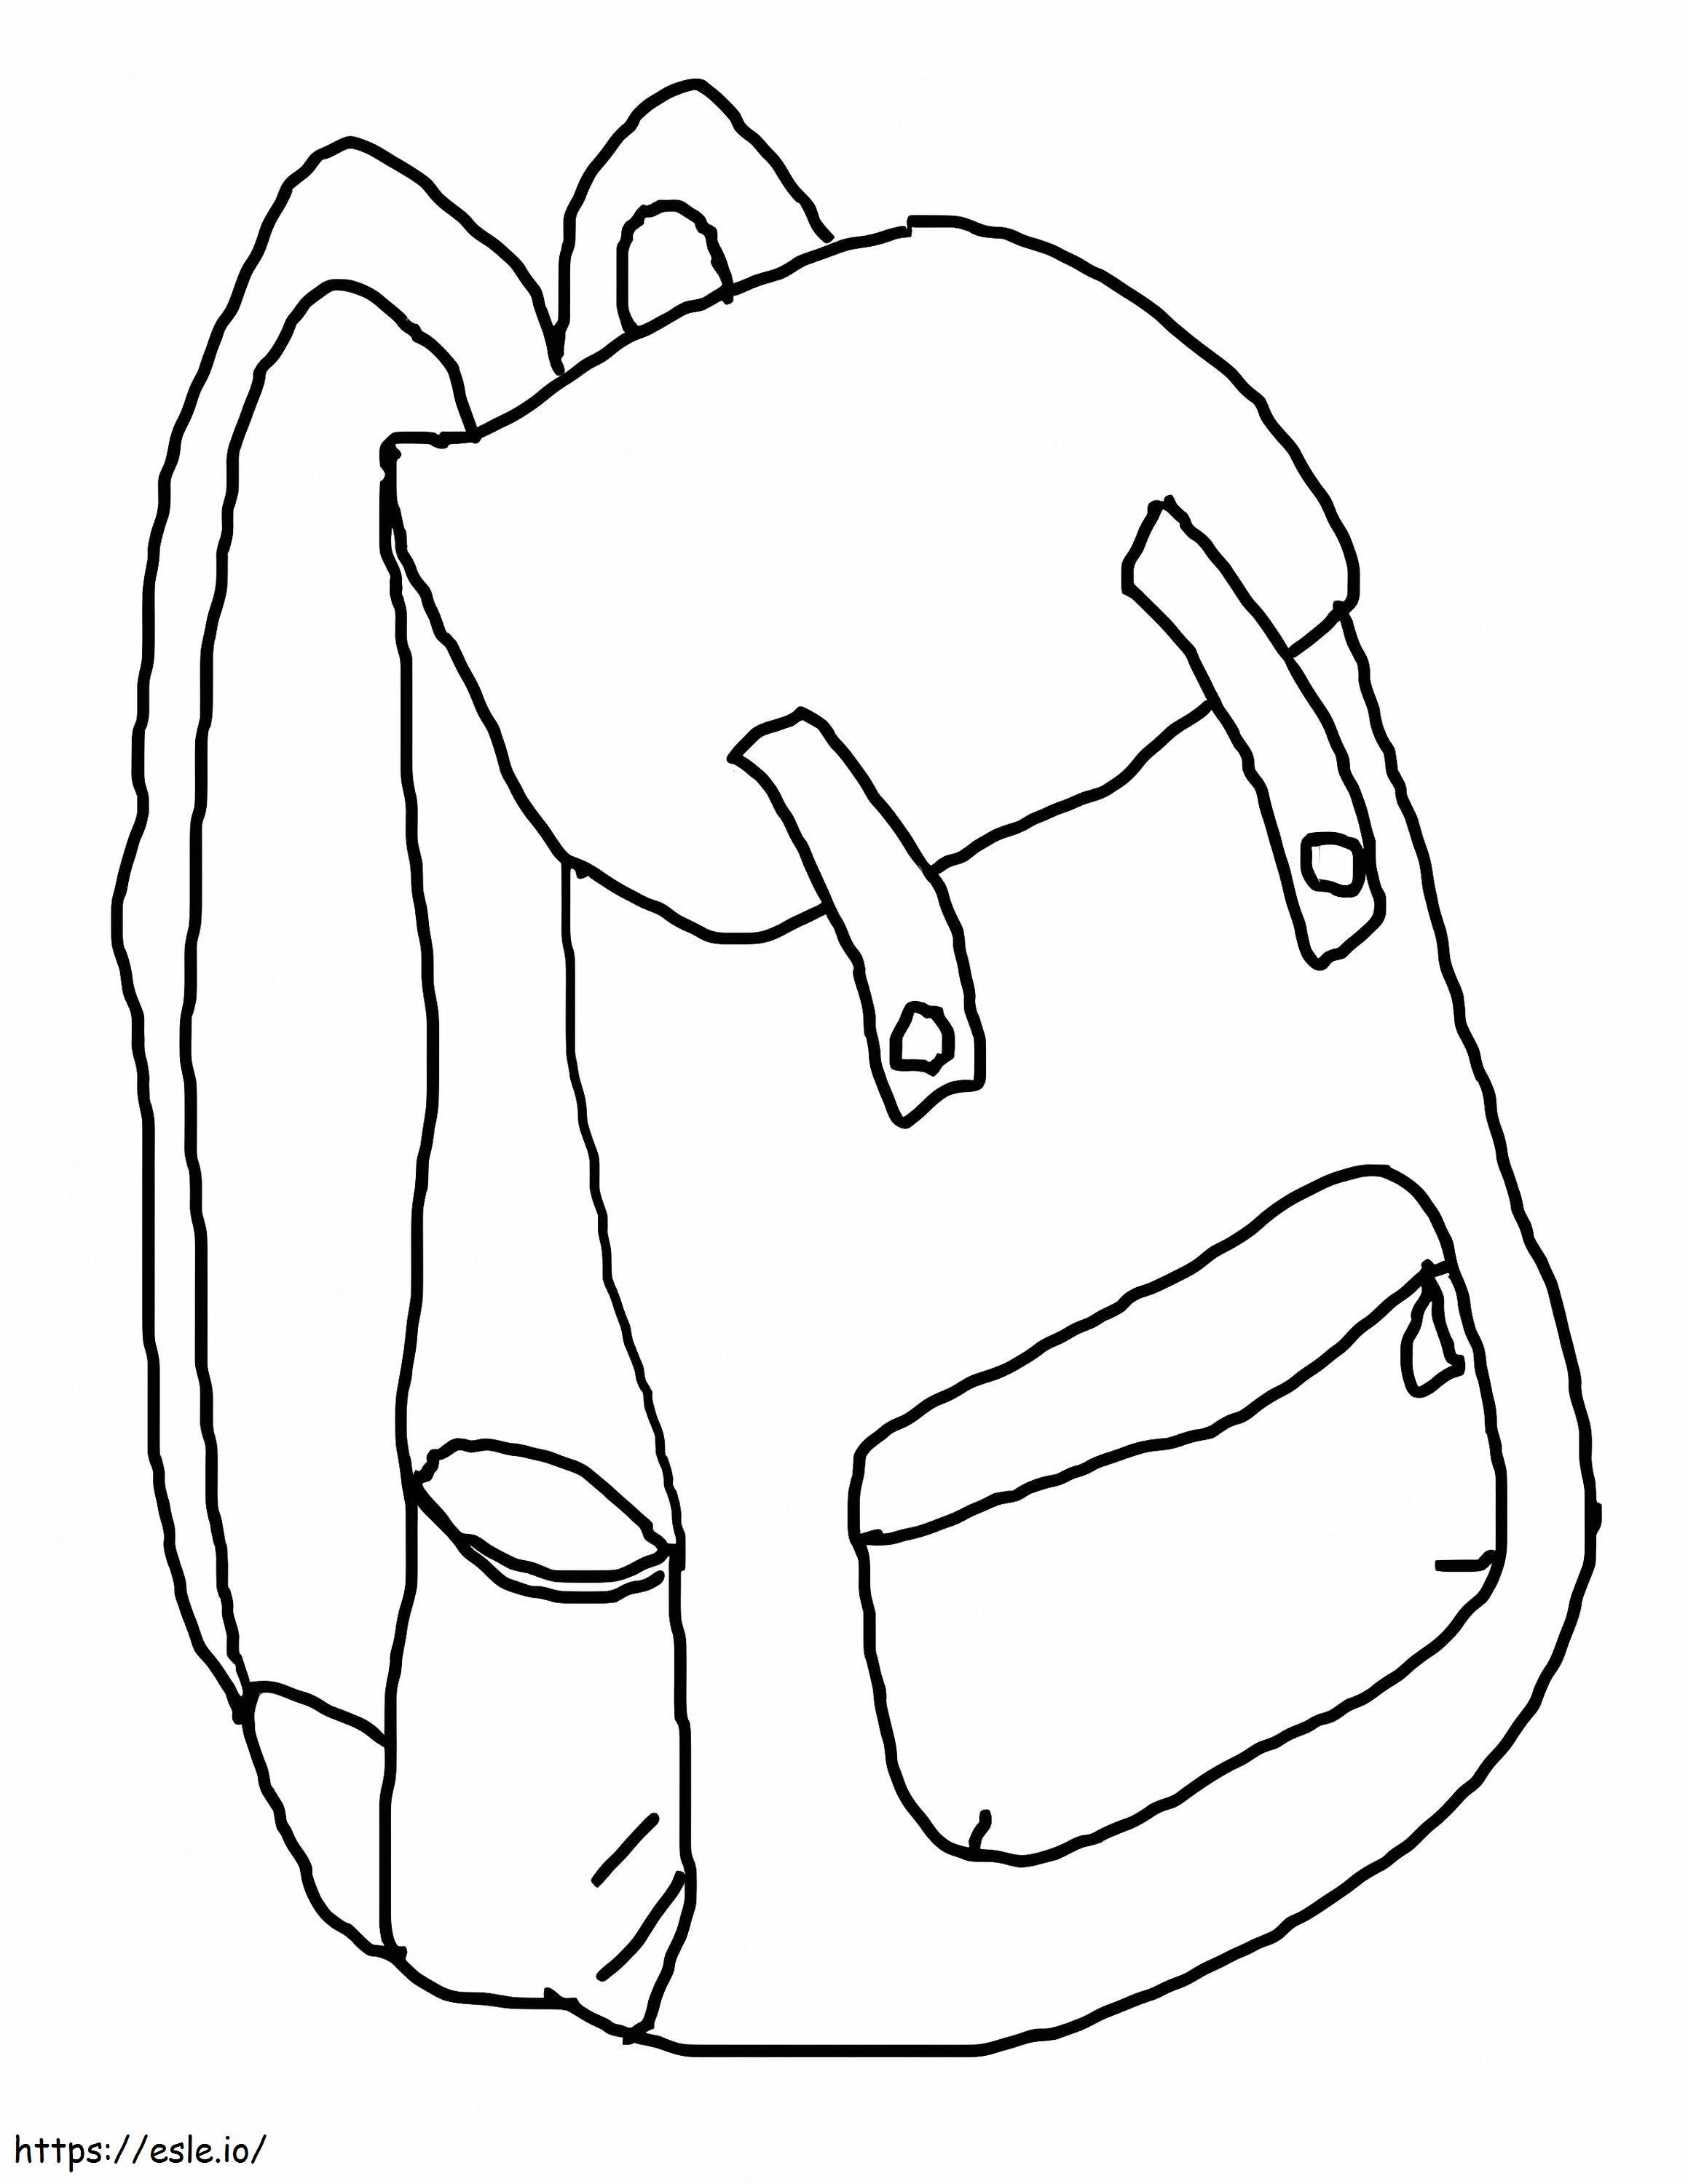 Printable Easy Backpack coloring page